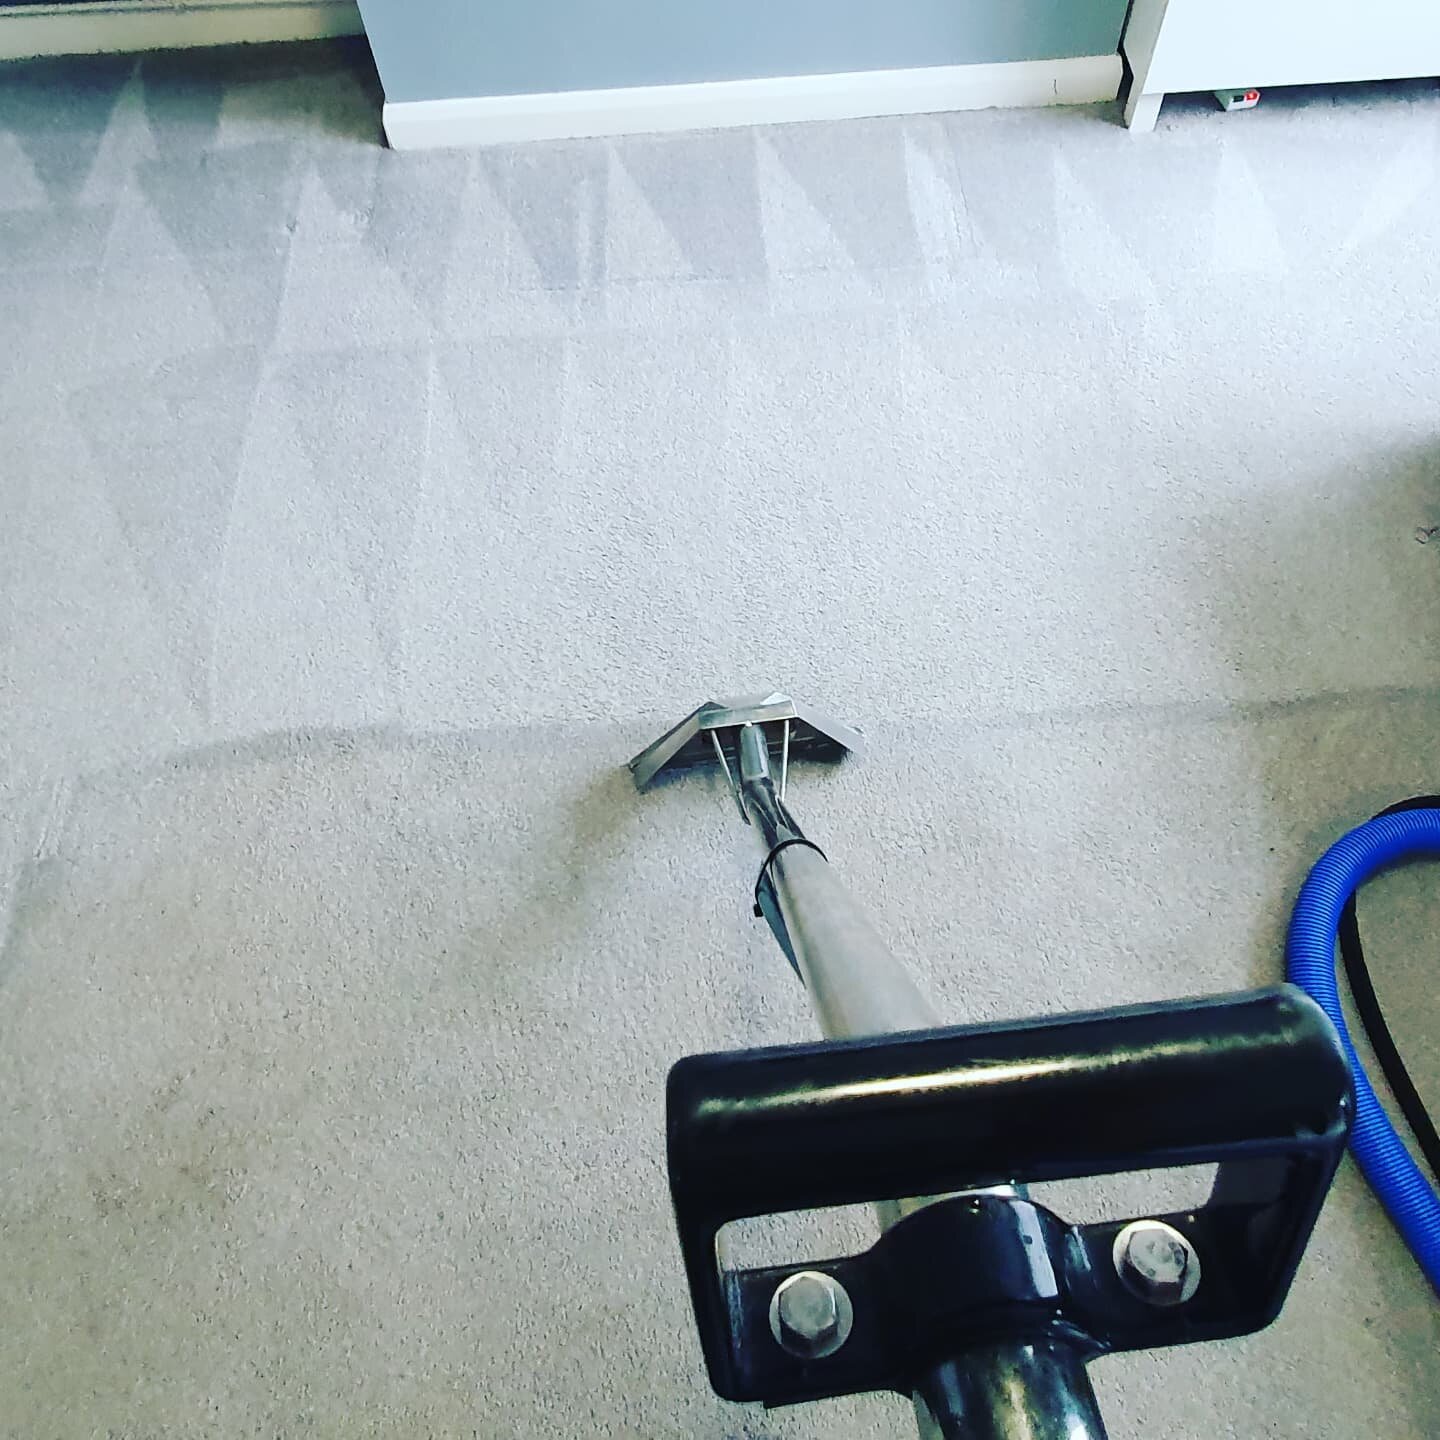 Awesome result today in Rainham, Kent 👌

Get in touch for a friendly chat about how we can help transform your carpets &amp; upholstery back to their glory days.

✅ Carpet Cleaning
✅ Upholstery Cleaning
✅ Stain Removal
✅ Odour Removal

📞 07712 268 